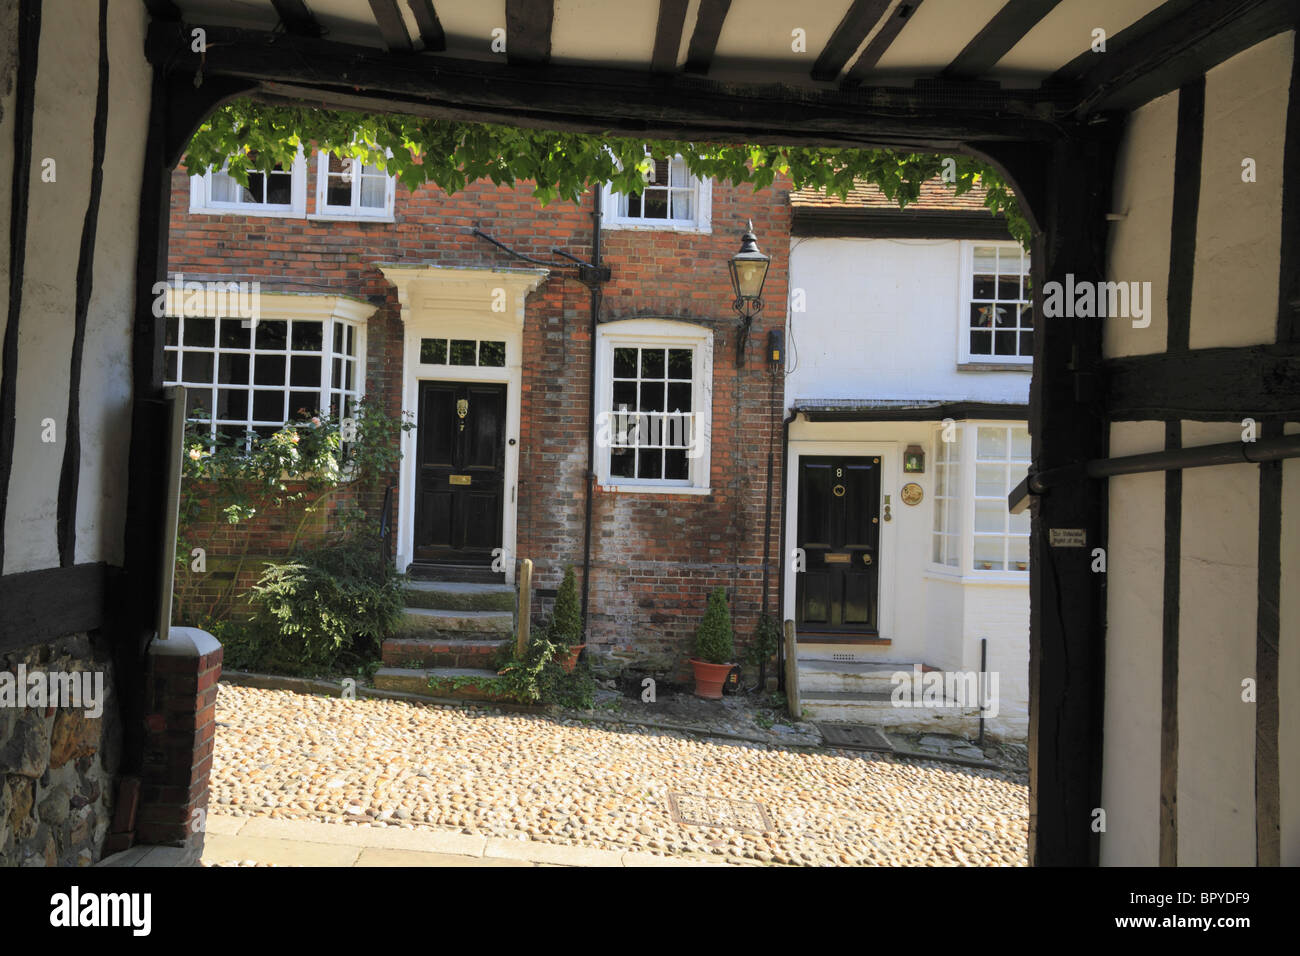 The old coach entrance to the historic Mermaid Inn at Rye, one of the oldest Inns in England. Stock Photo